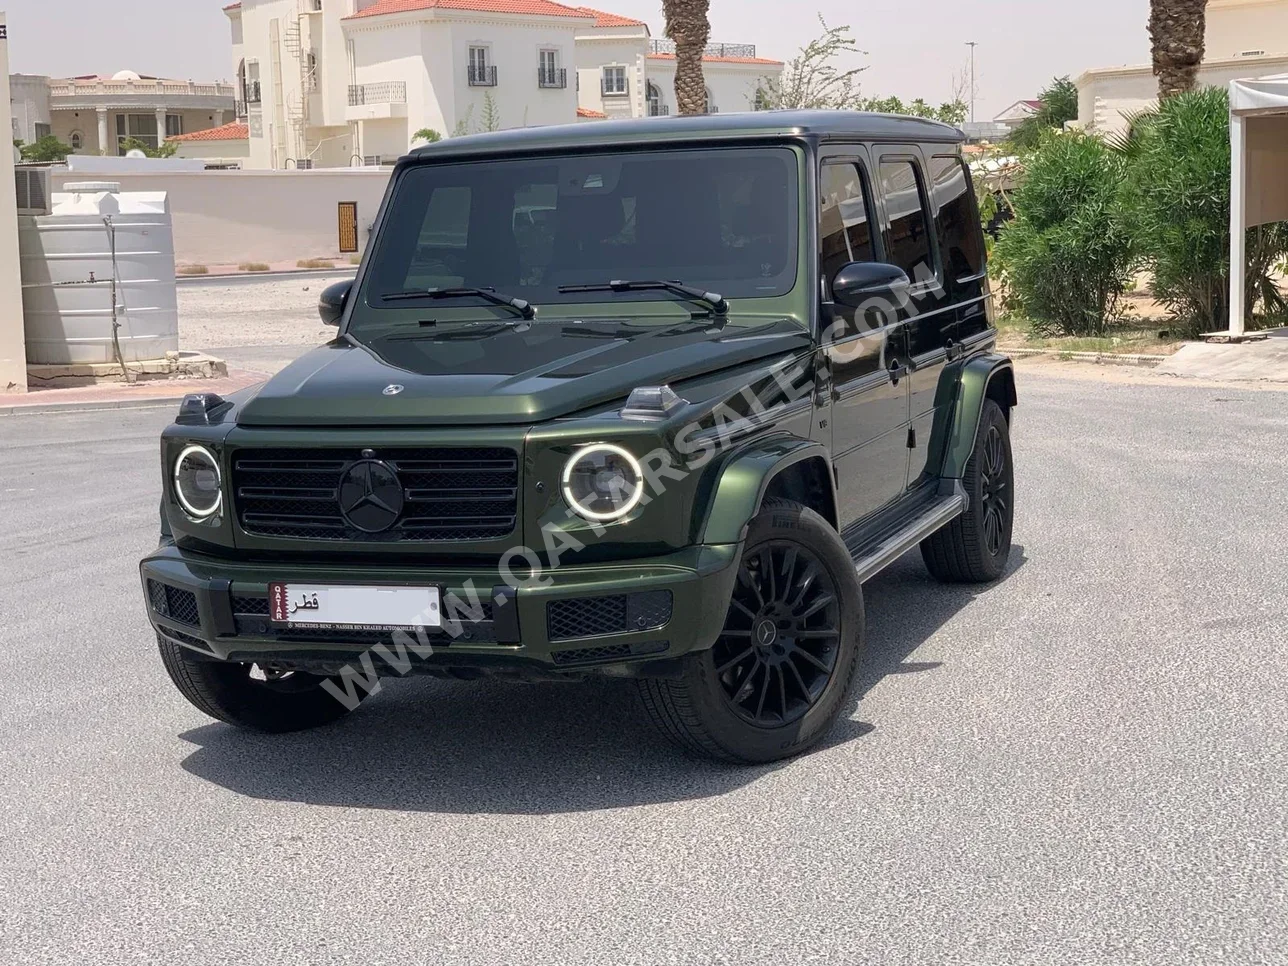 Mercedes-Benz  G-Class  500  2022  Automatic  7,000 Km  8 Cylinder  Four Wheel Drive (4WD)  SUV  Green  With Warranty